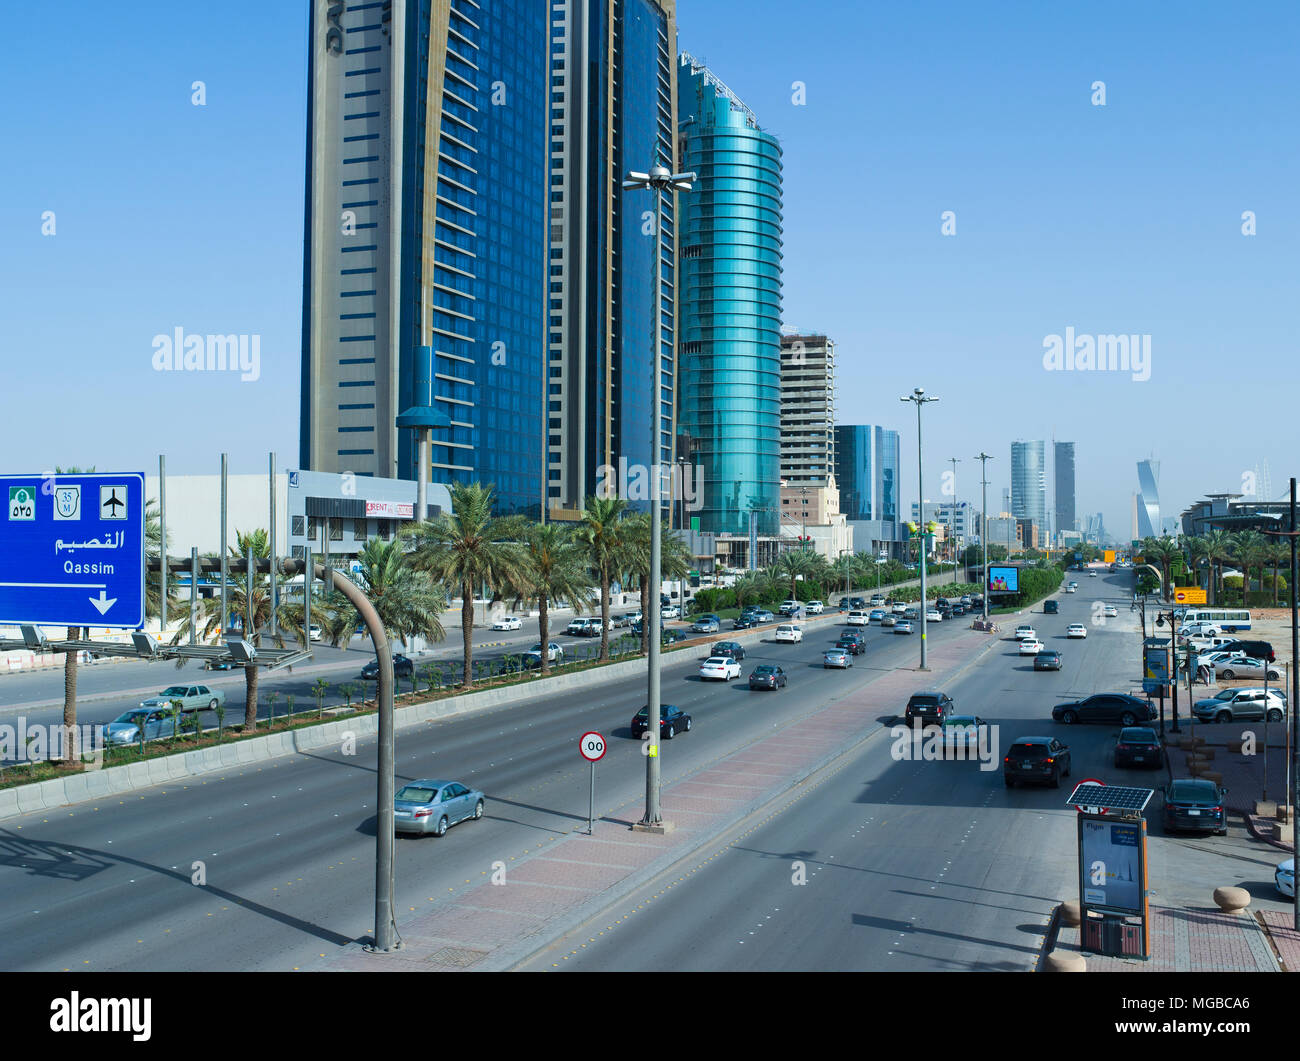 This April Only Around One Million Foreign Workers Have Left Saudi Arabia For Good, Which Explains This Light Traffic on King Fahad Road Early in The  Stock Photo